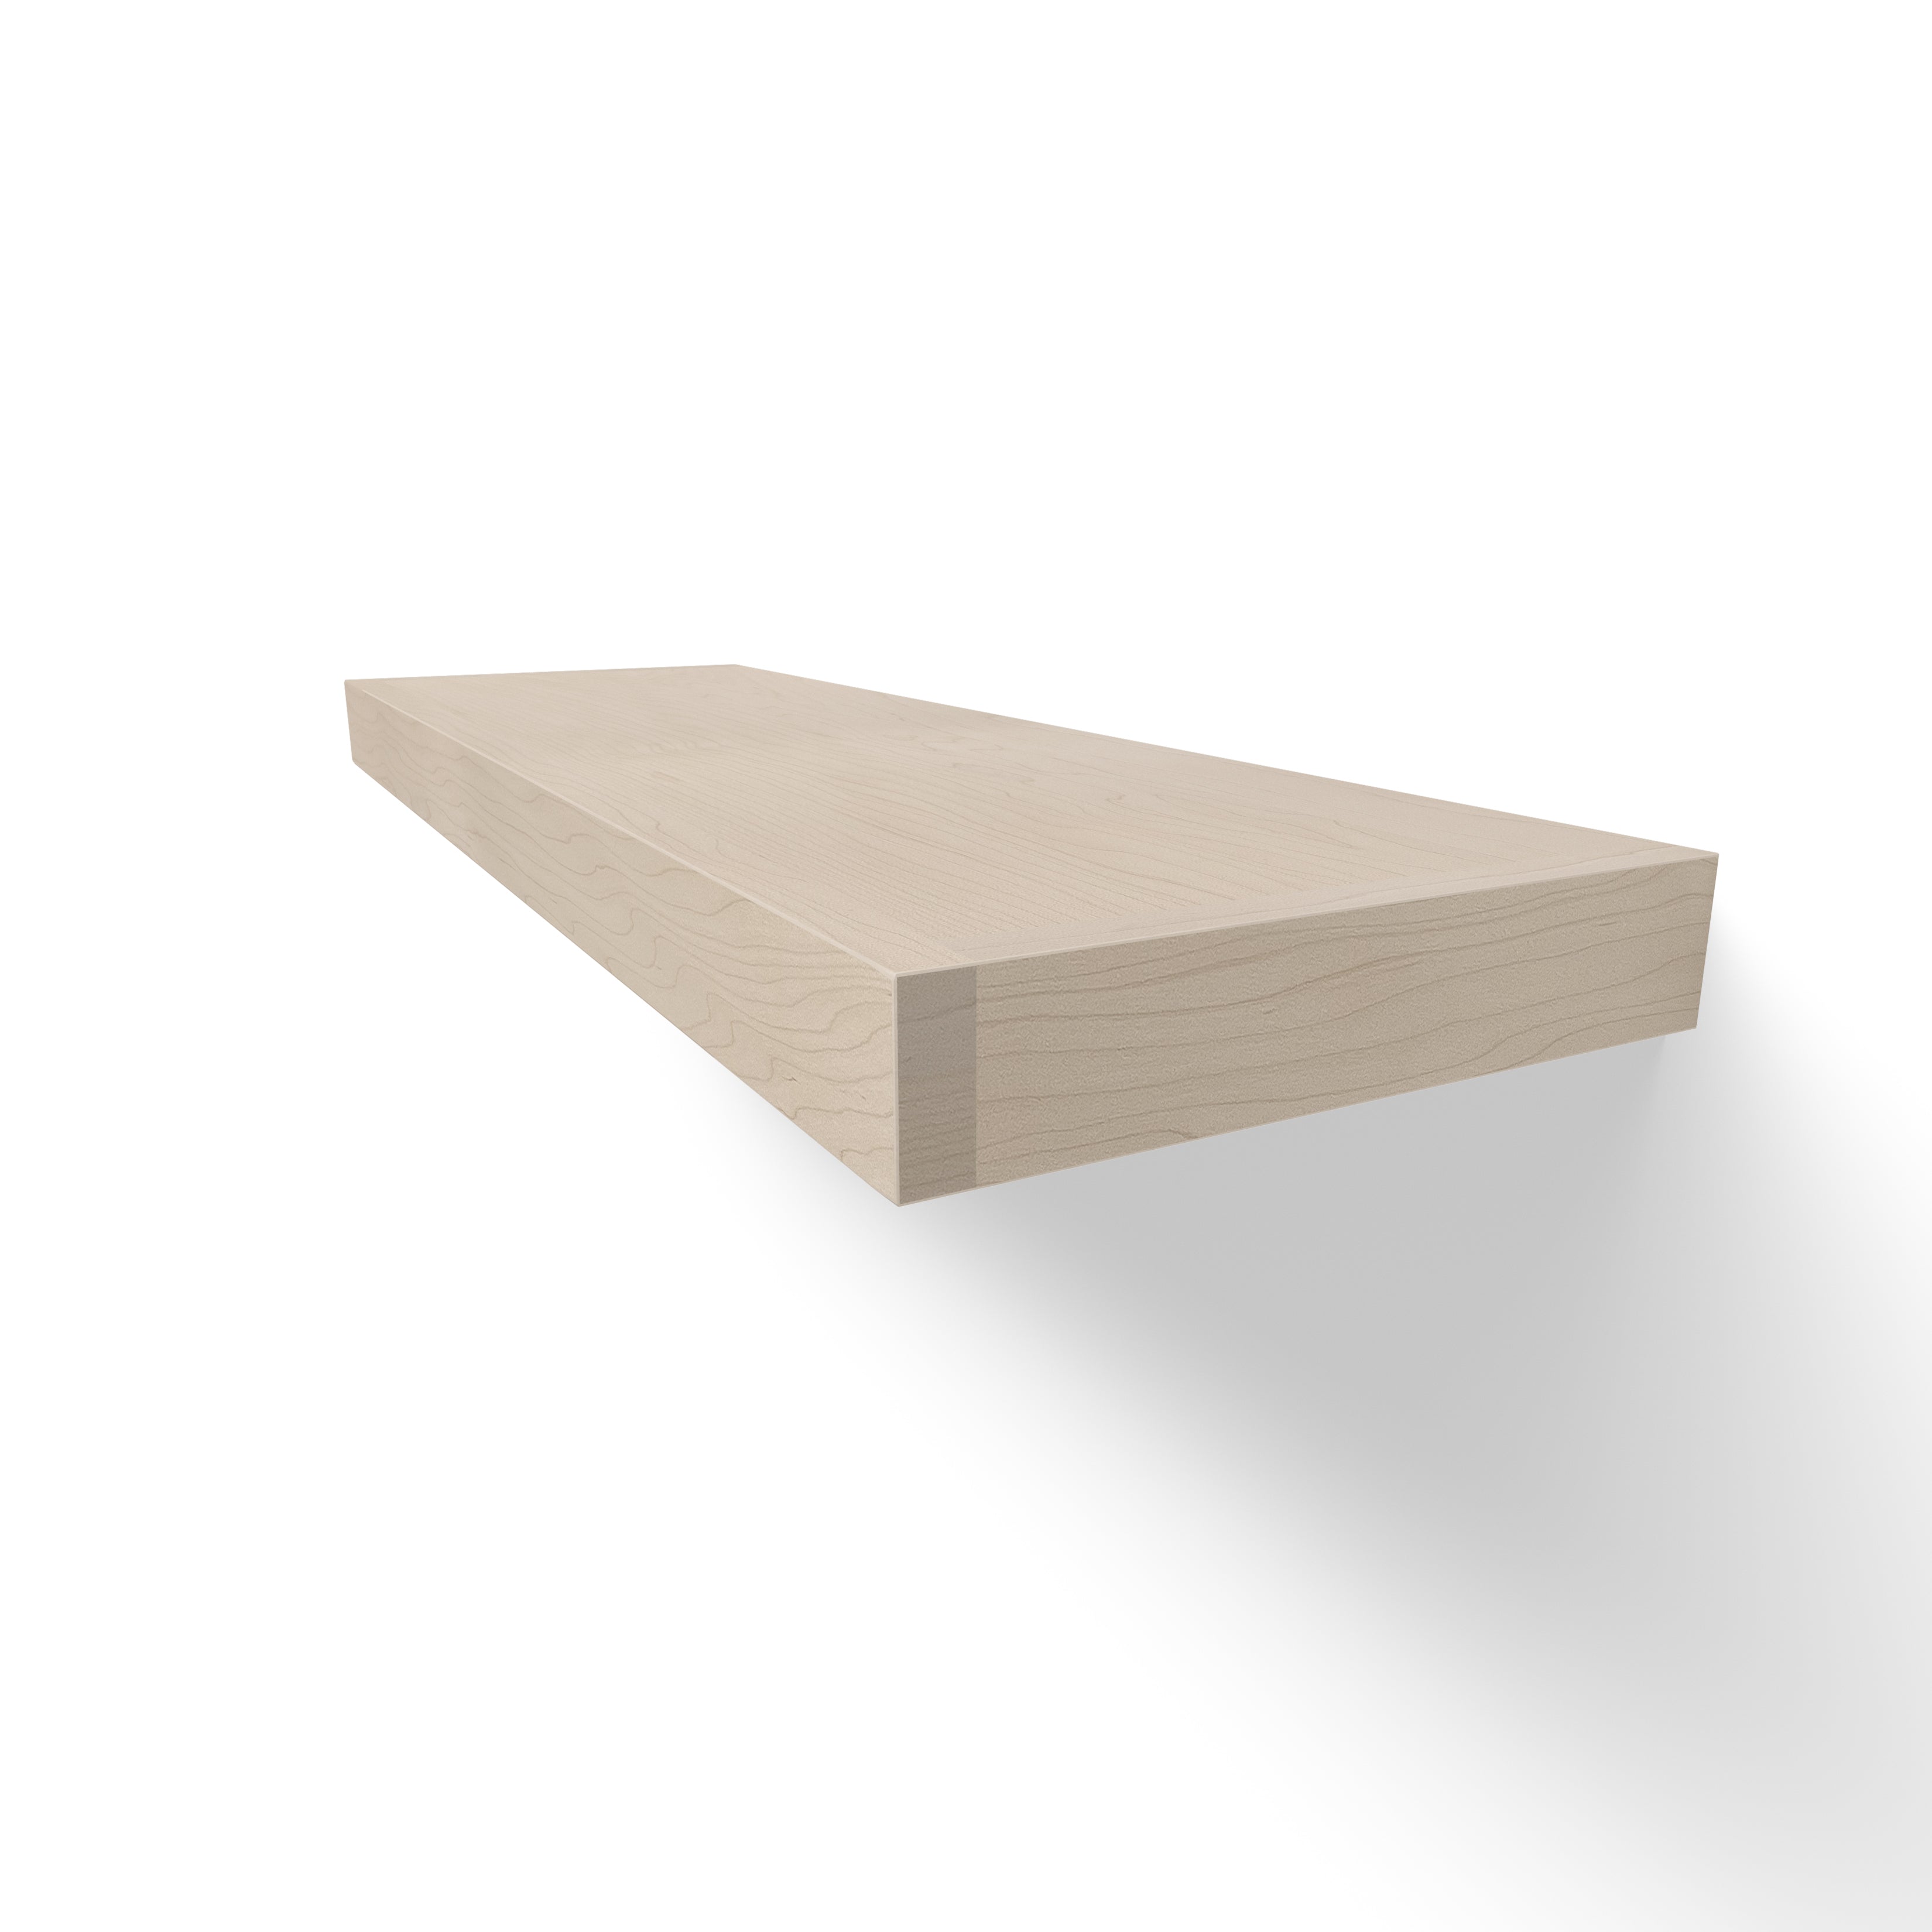 Maple 2 inch Thick Floating Shelf